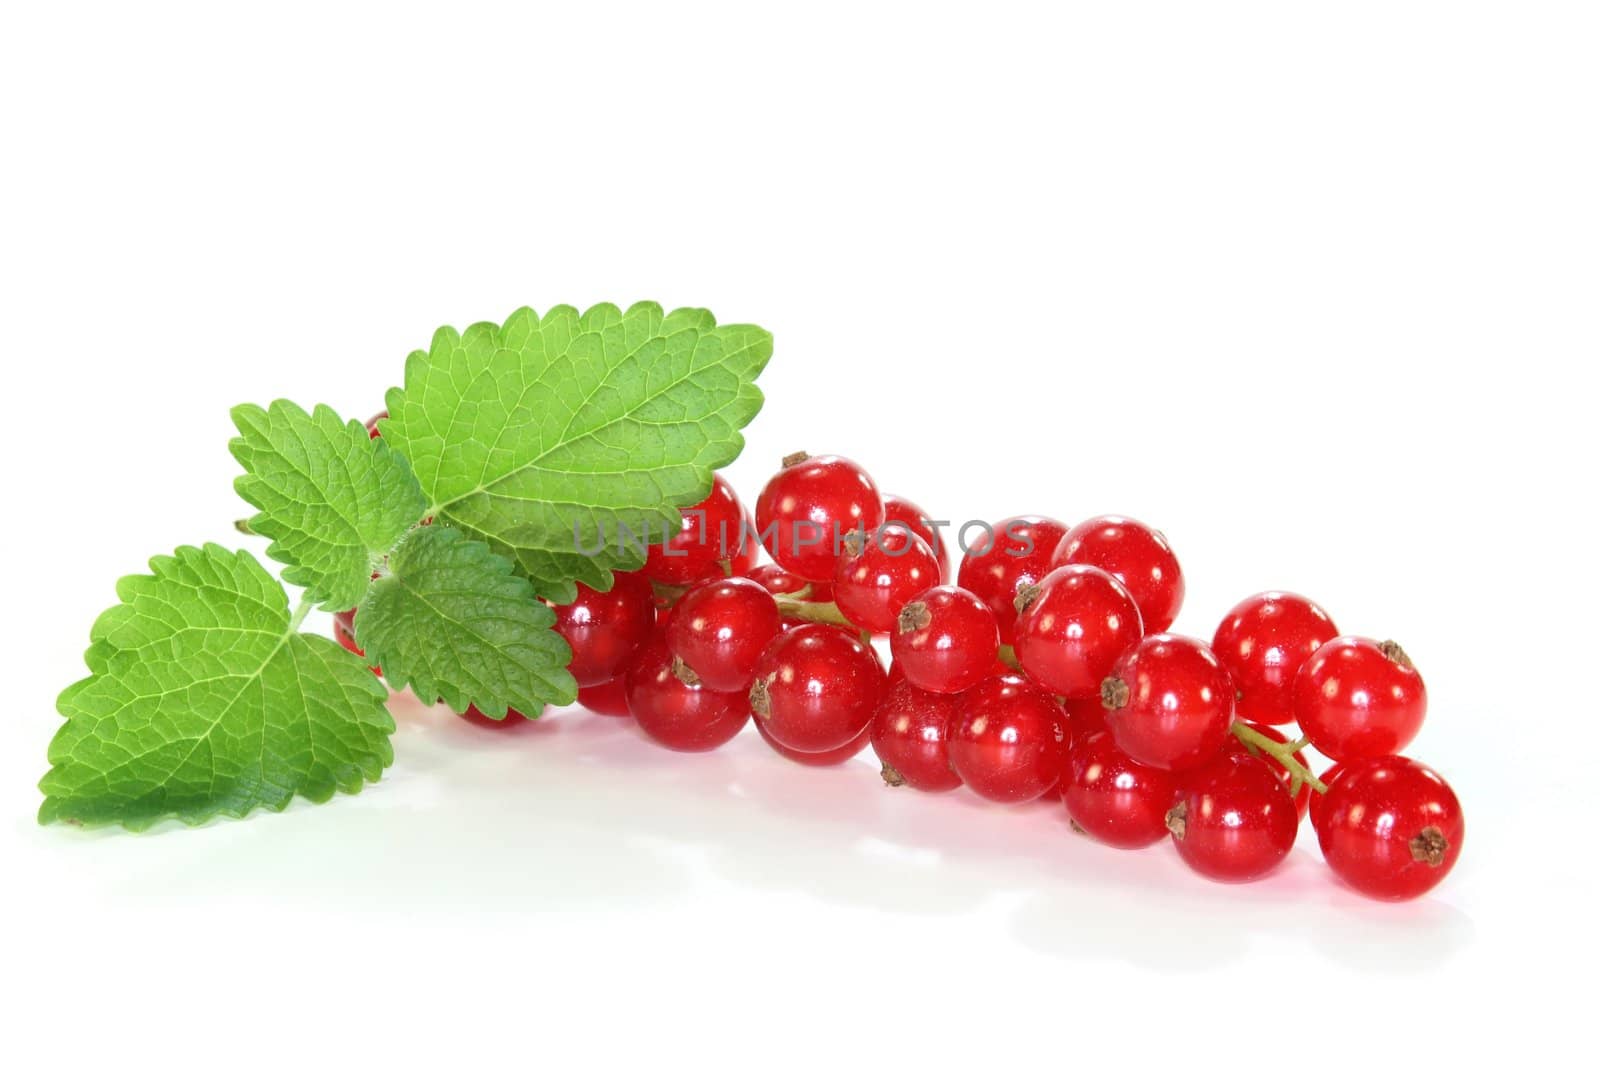 fresh red currants on a white background